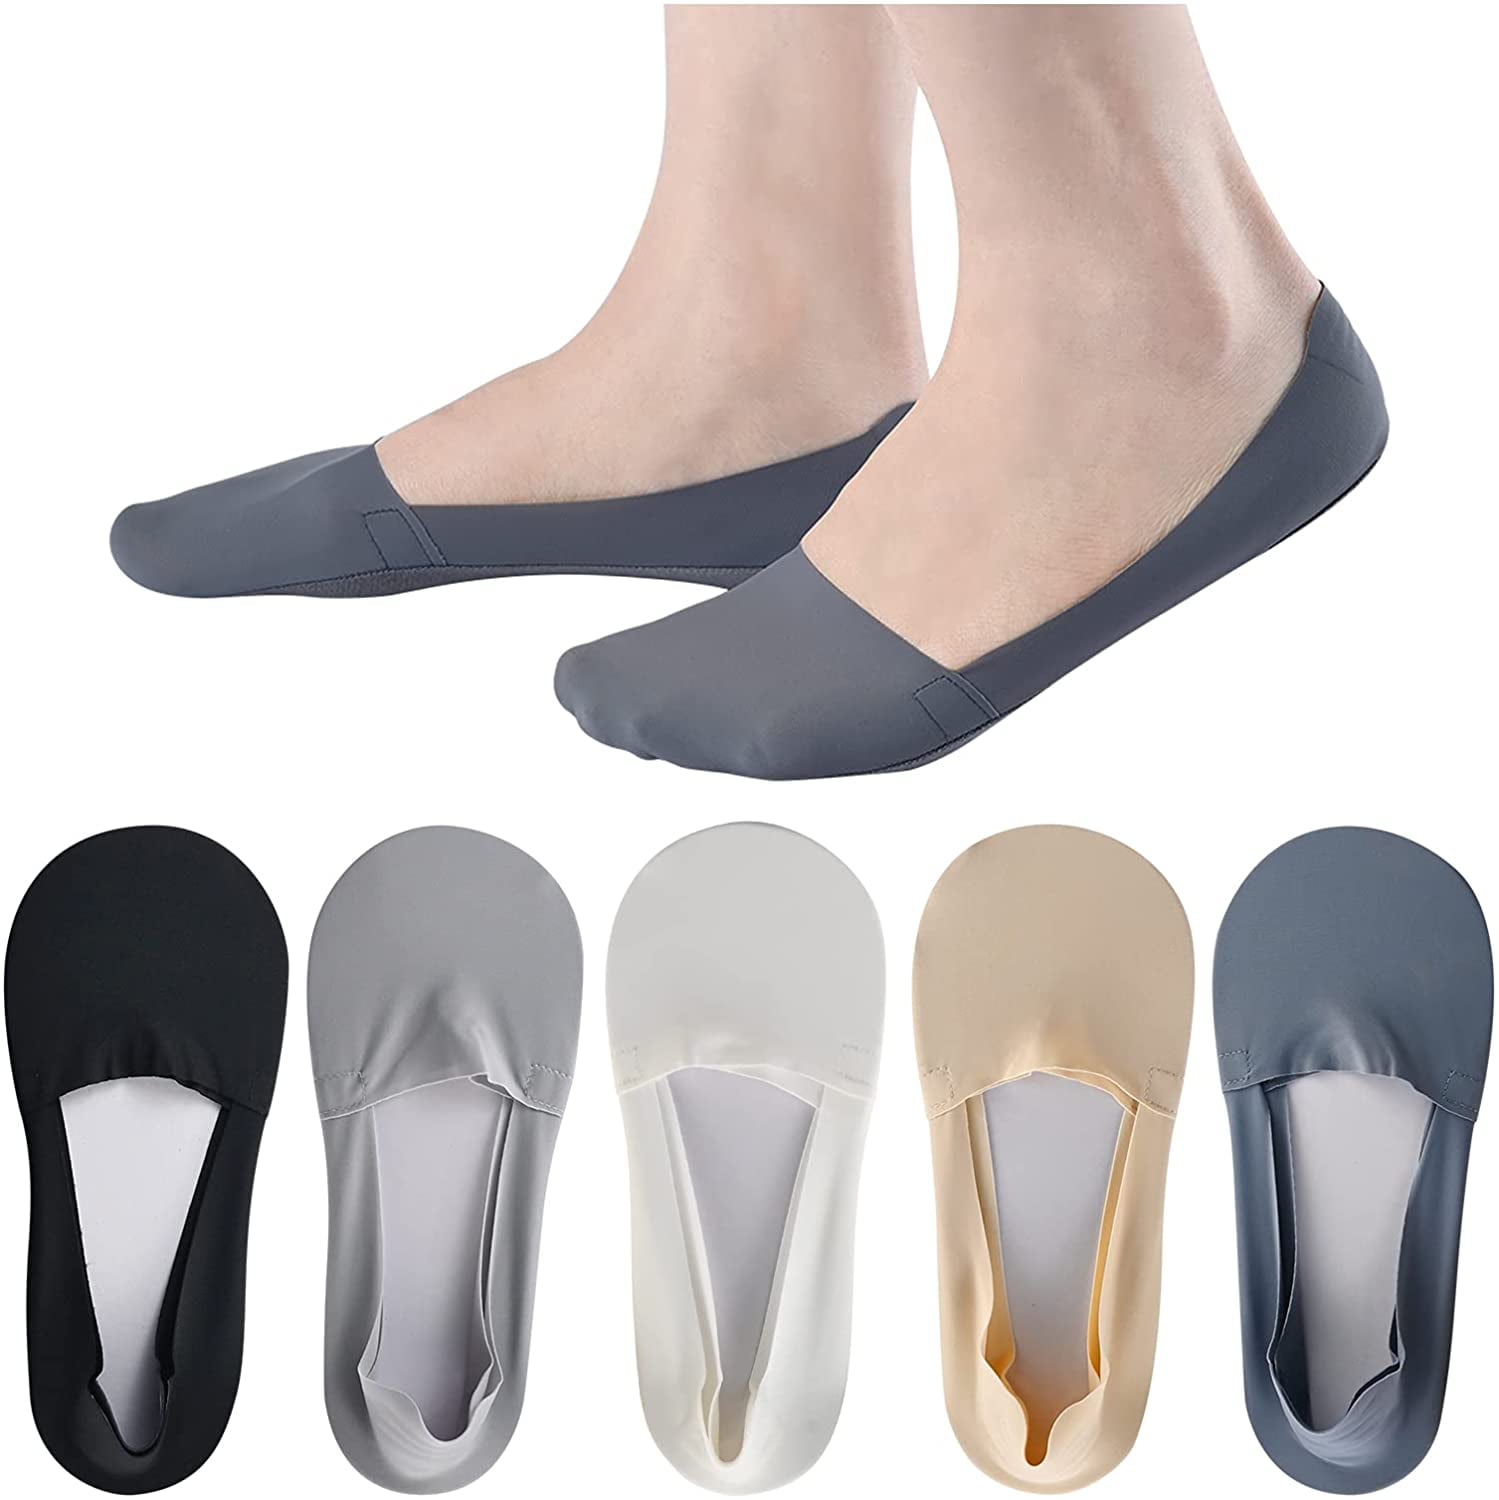 Thin Breathable No Show Socks Womens,Cotton Nylon Flat Invisible Liner Socks For Women With Silicone Non-Slip Heel 5 Pairs